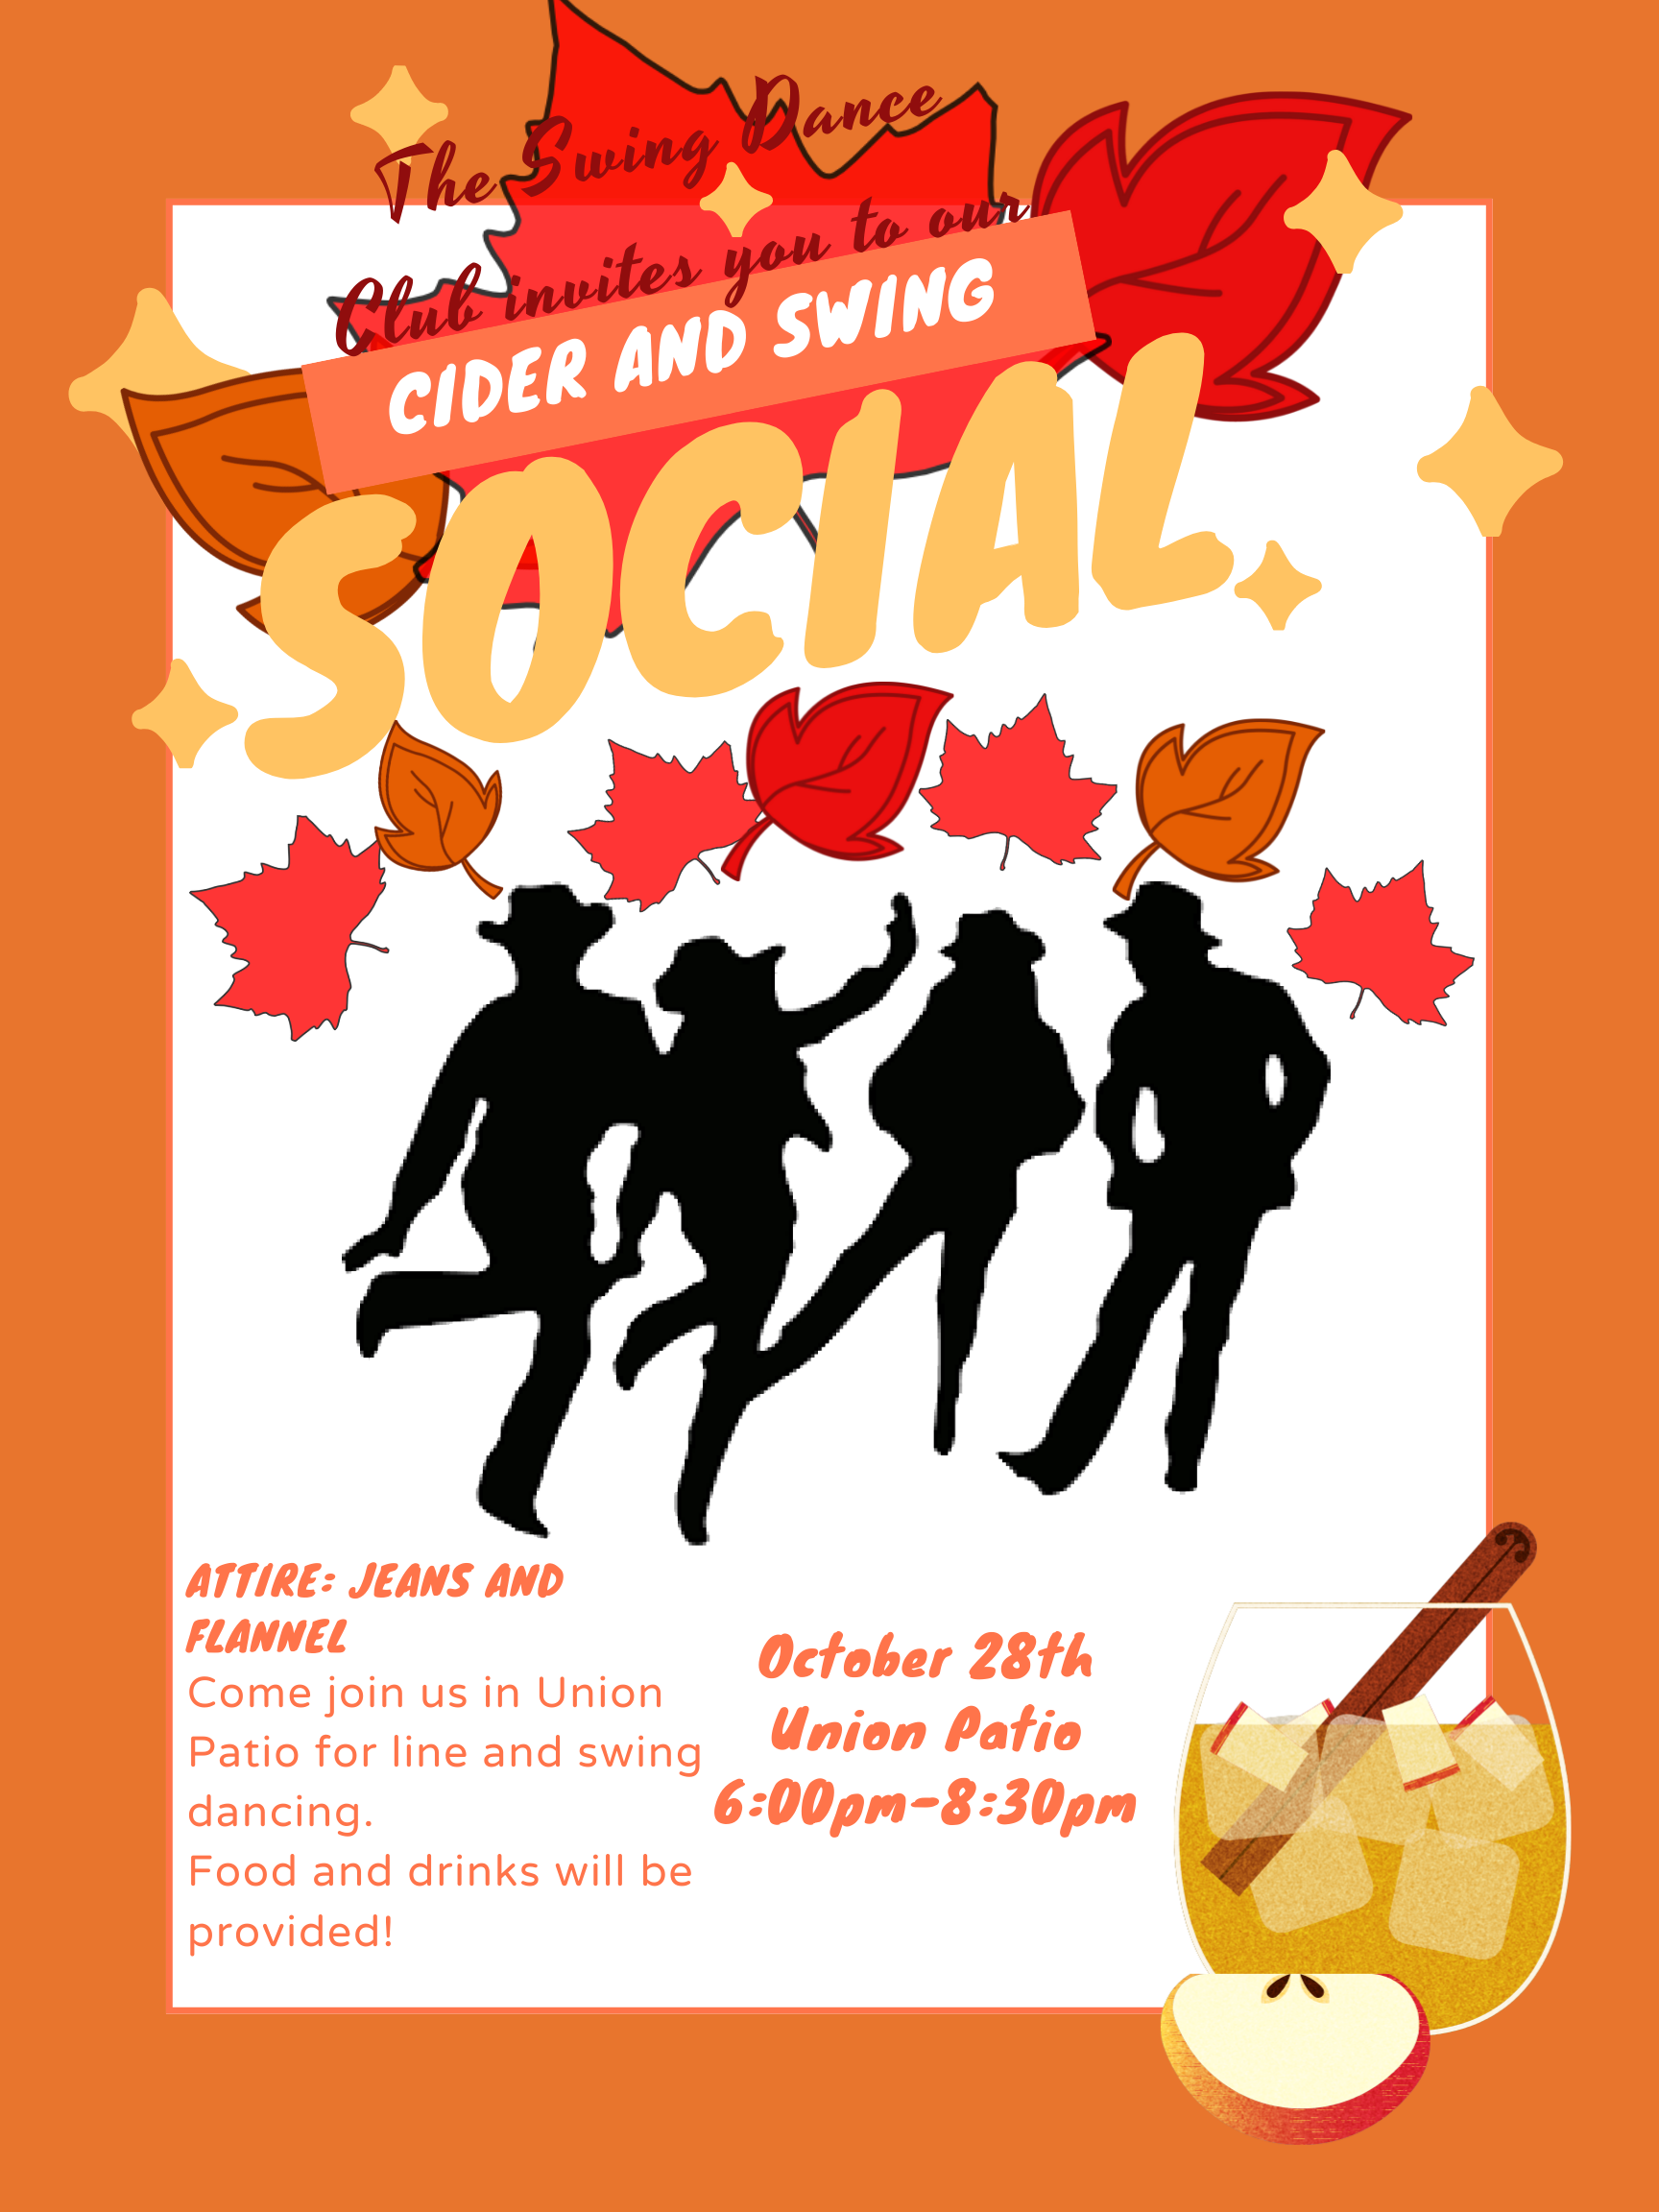 Swing and cider social